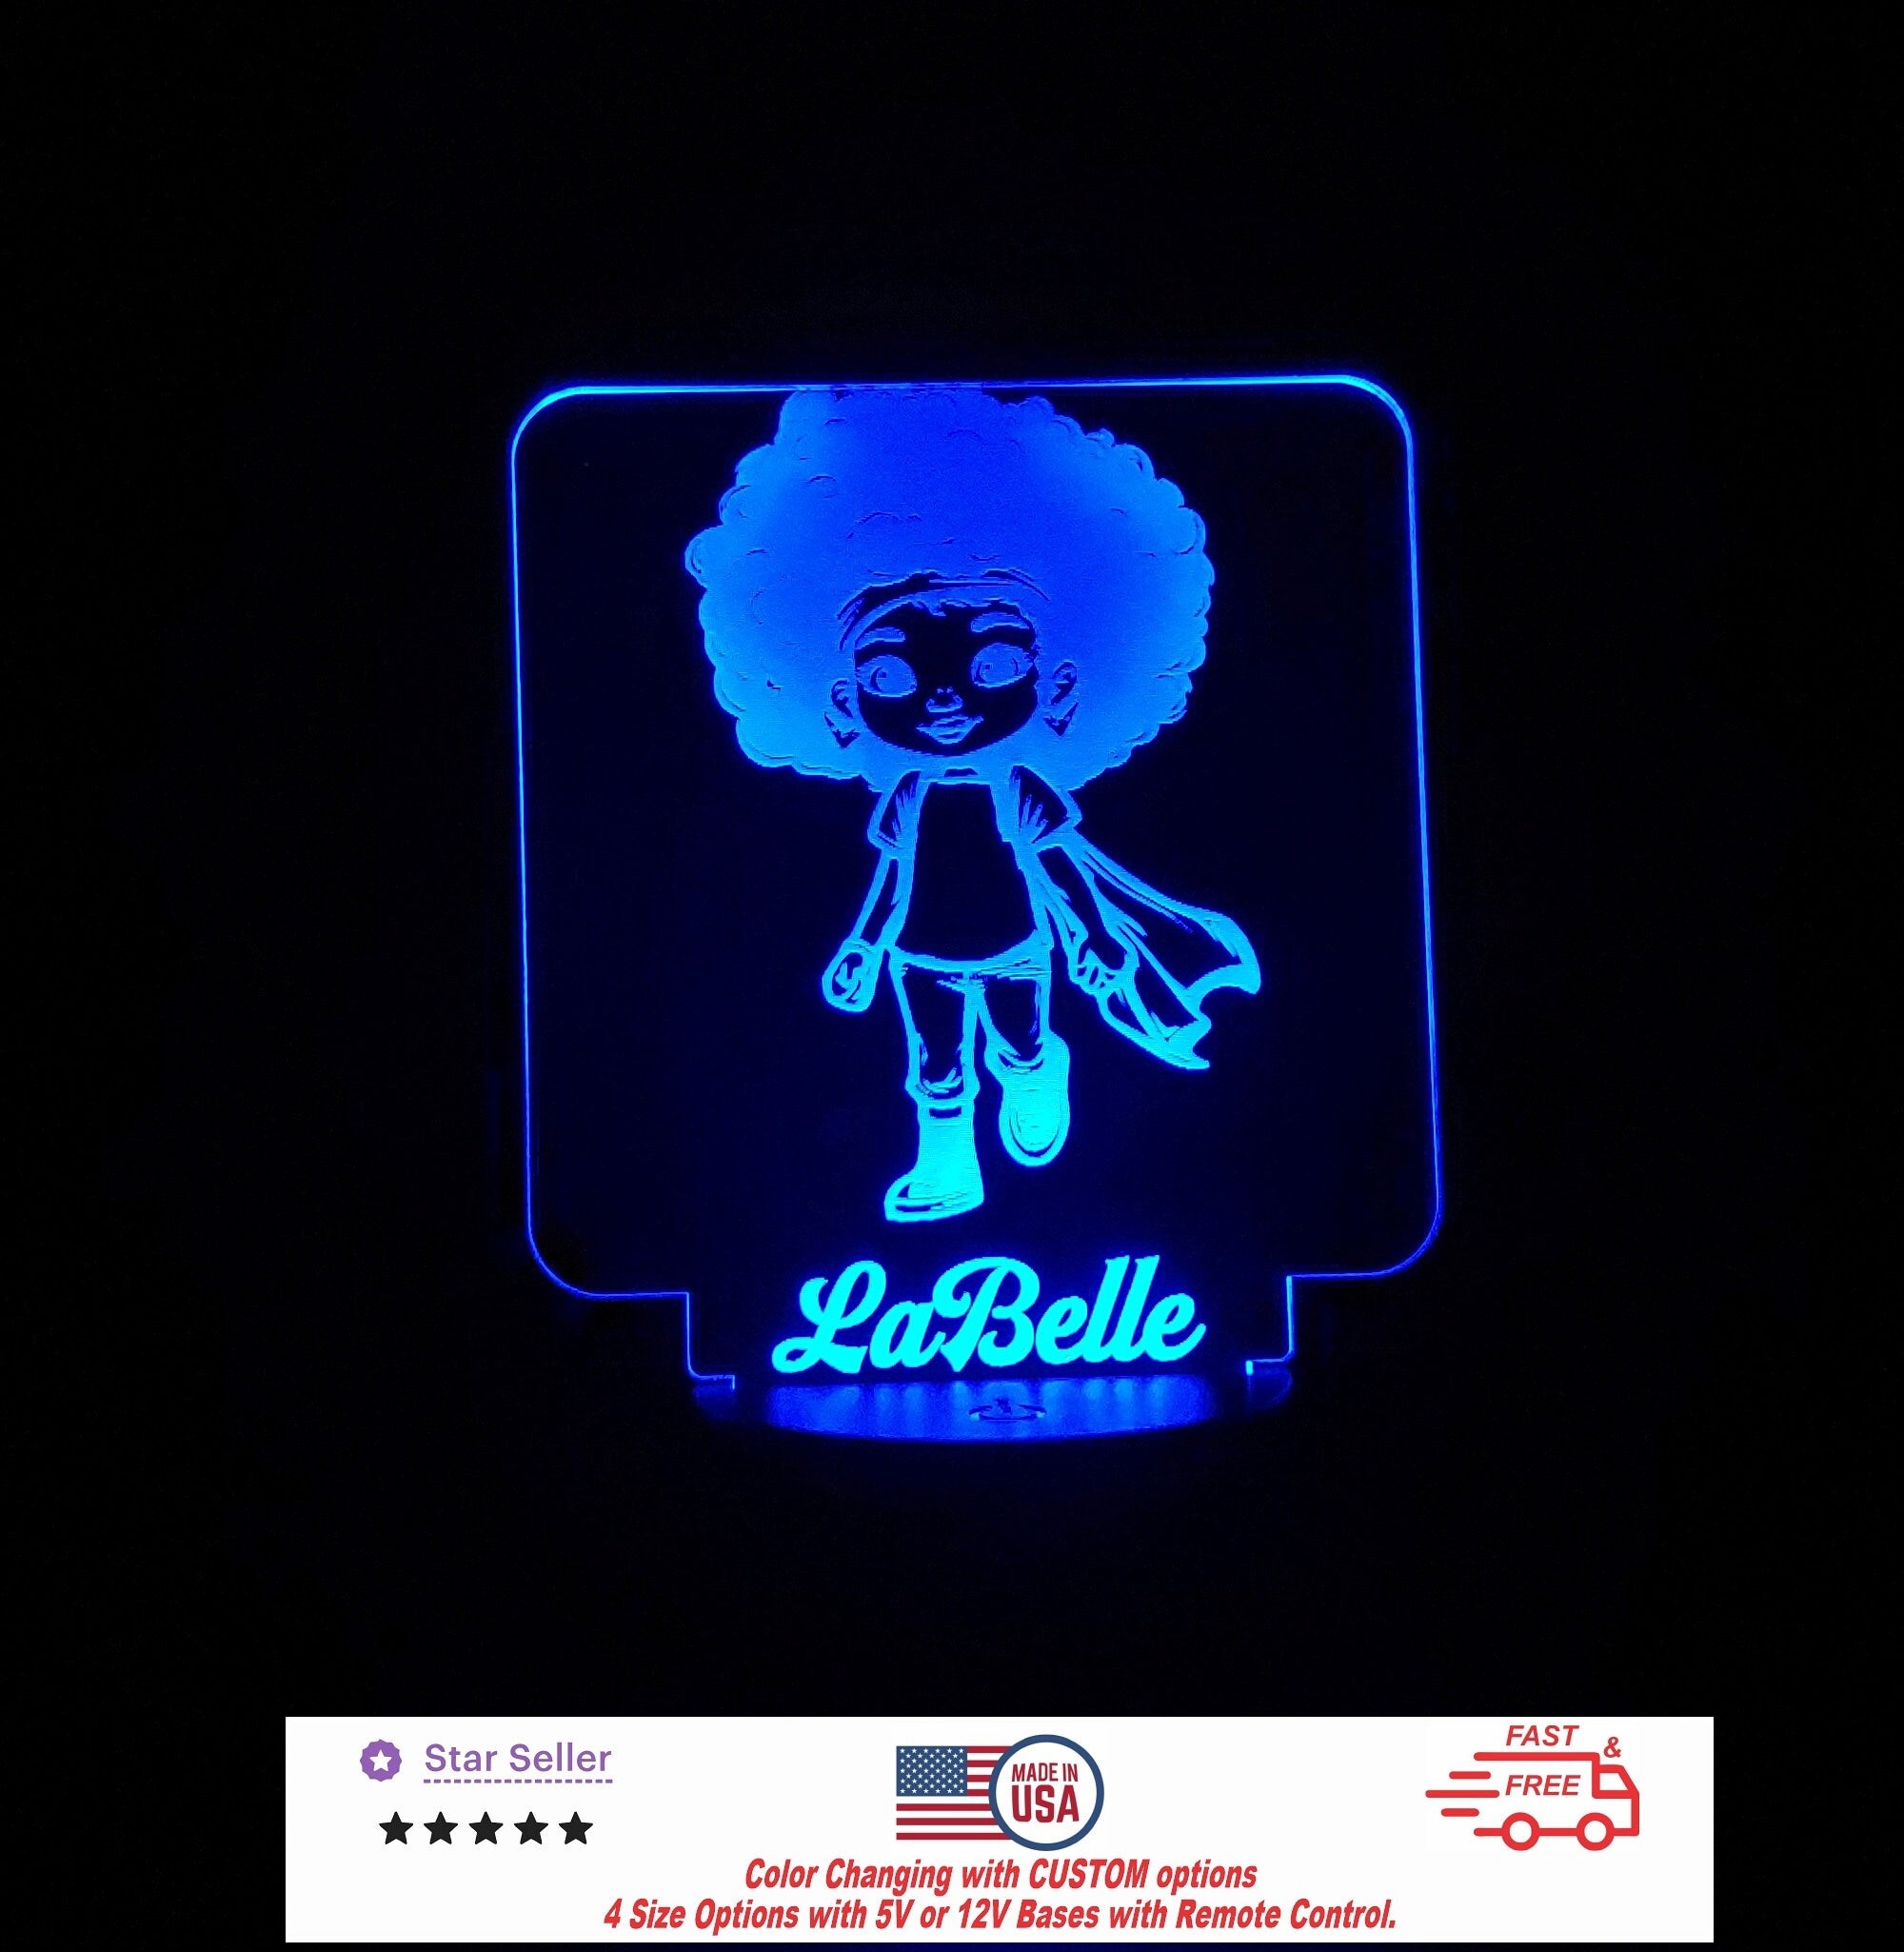 Custom Kids Baby Princess Personalized LED Night Light ,Neon sign, Room Decor, Party Enhancer Nursery Kids Room, Free Shipping Made in USA